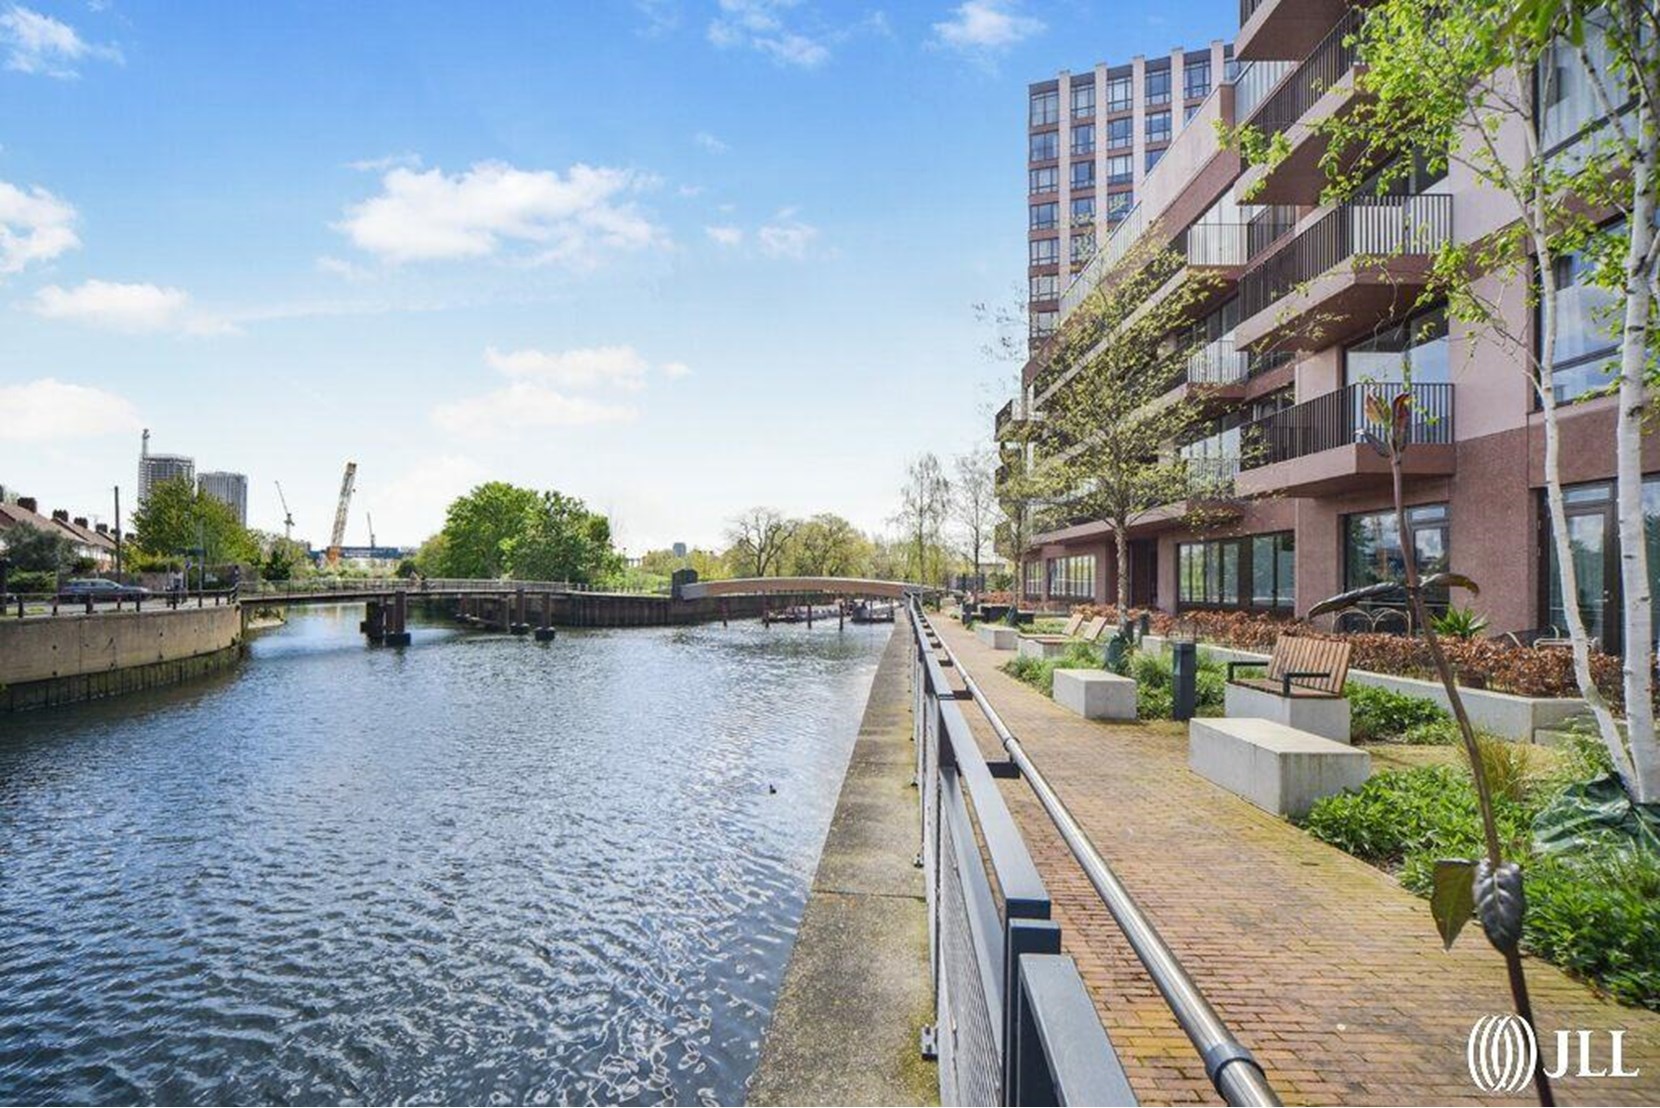 Houses and Apartments to Rent by JLL at Sugar House Island, Newham, E15, development panoramic